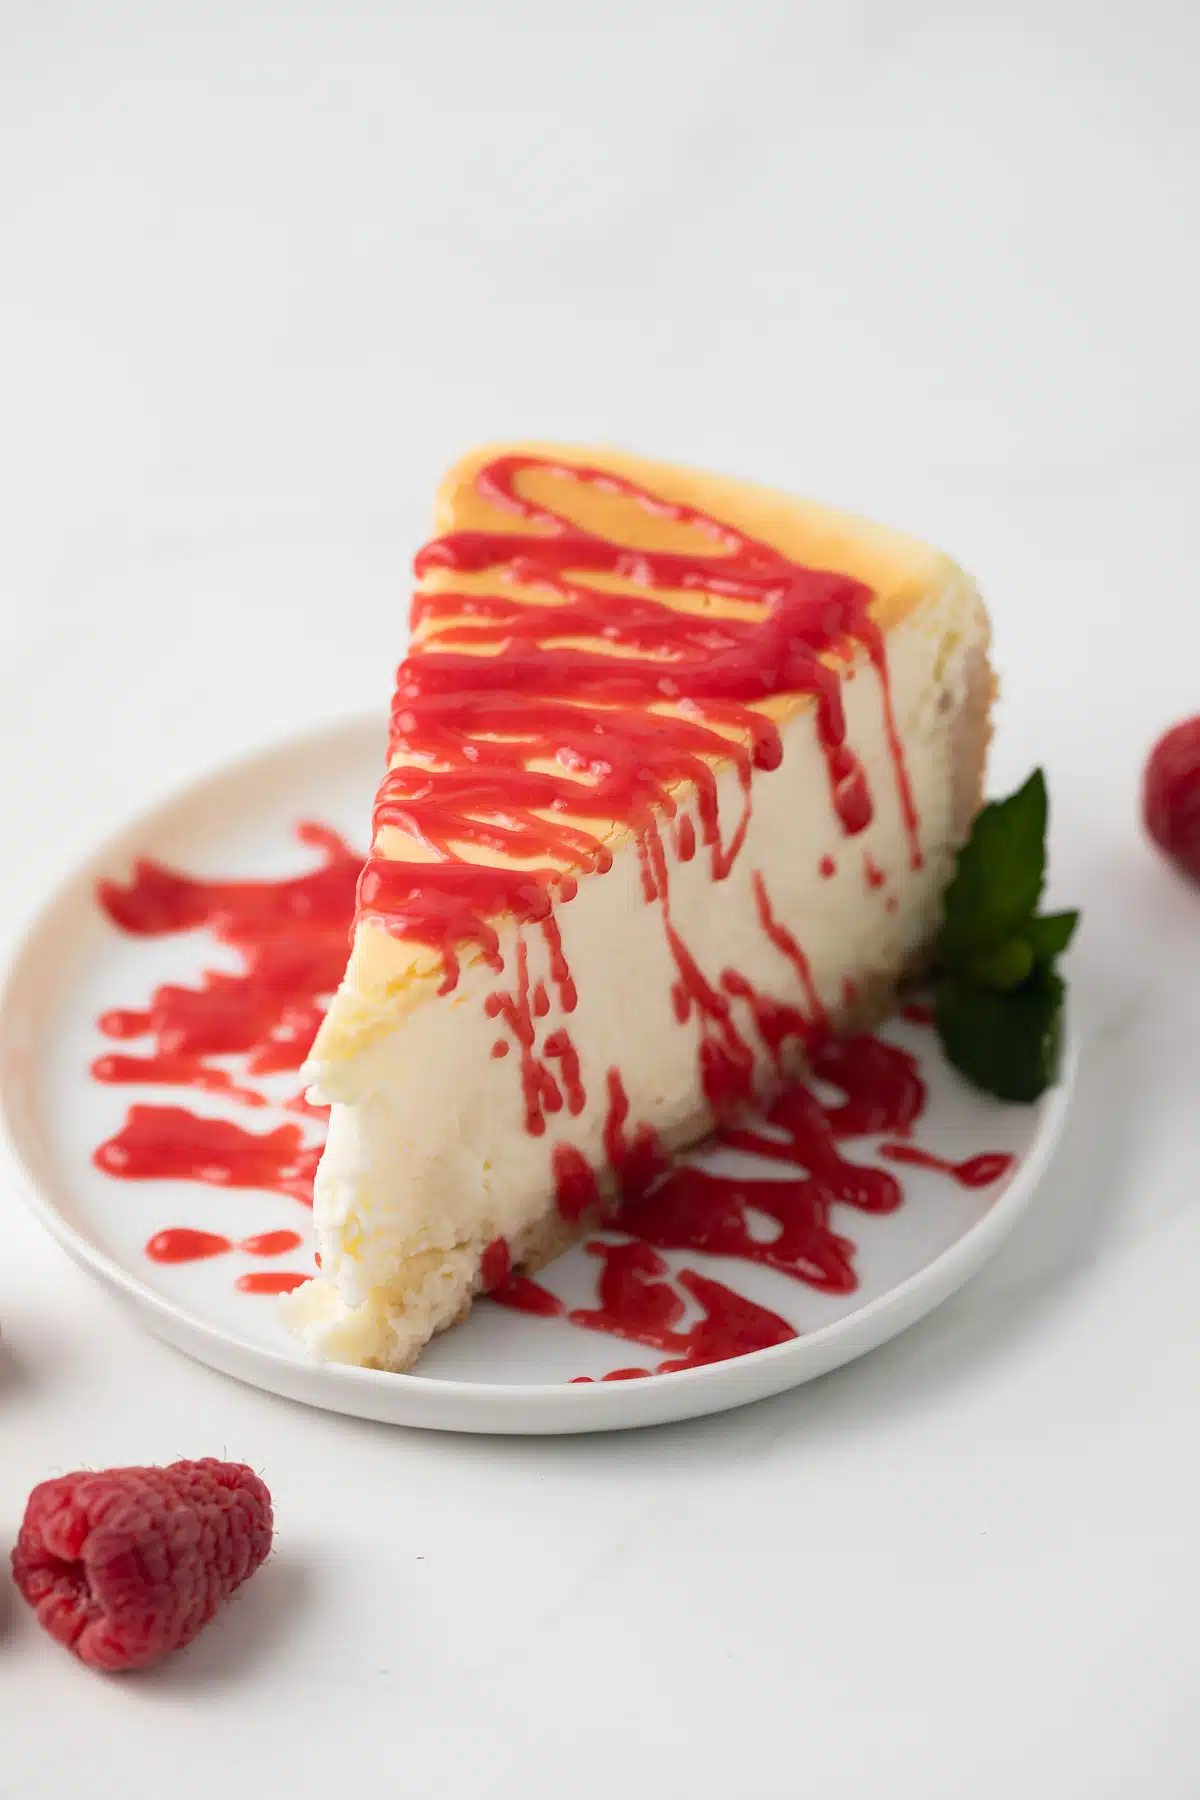 Raspberry sauce drizzled over cheesecake slice.